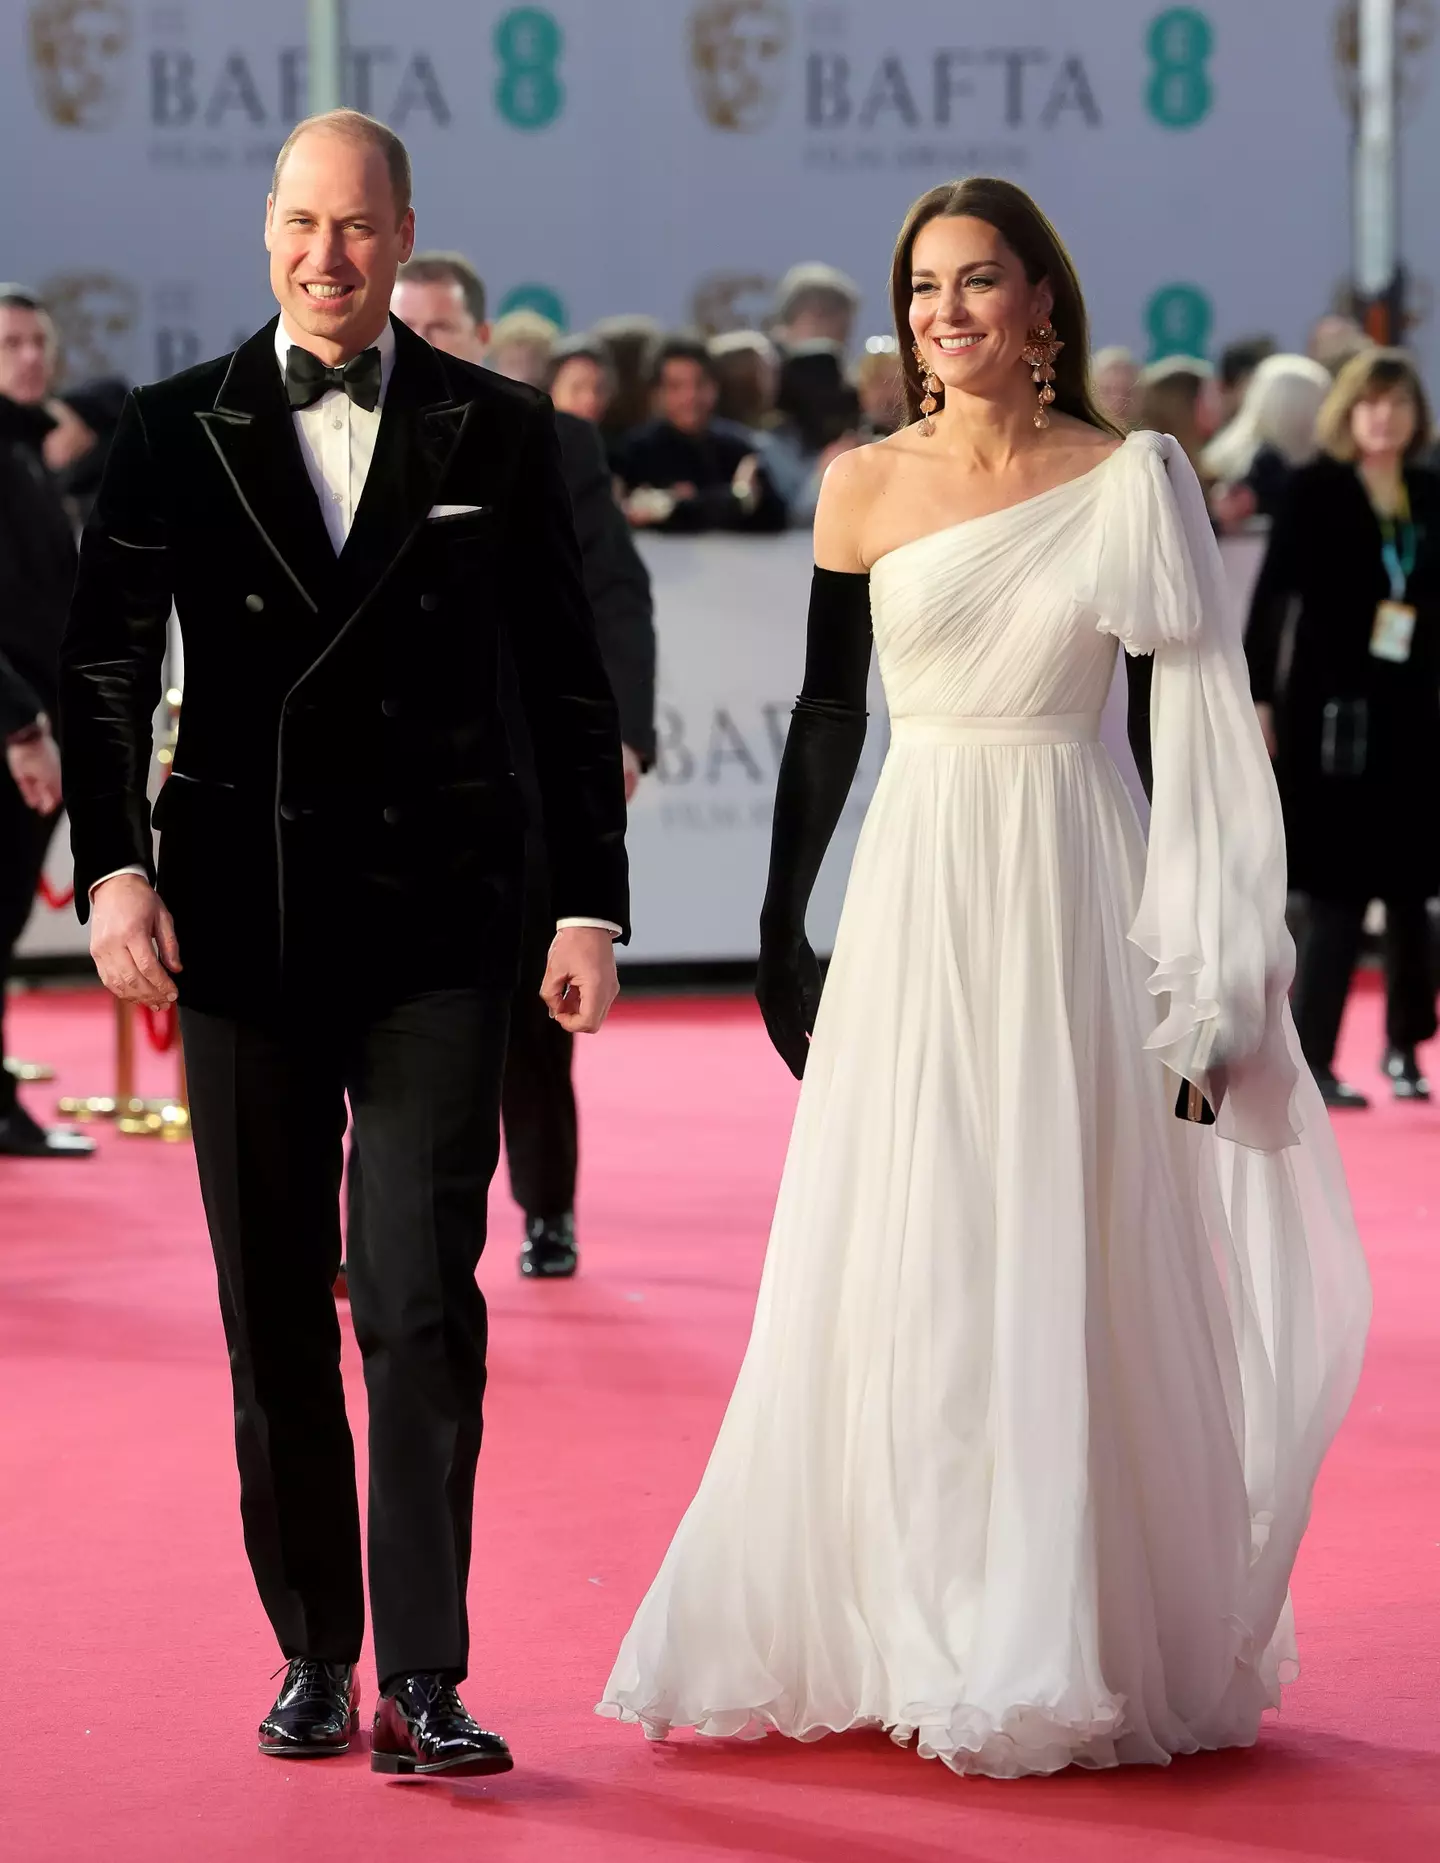 The prince and princess wowed on the red carpet.